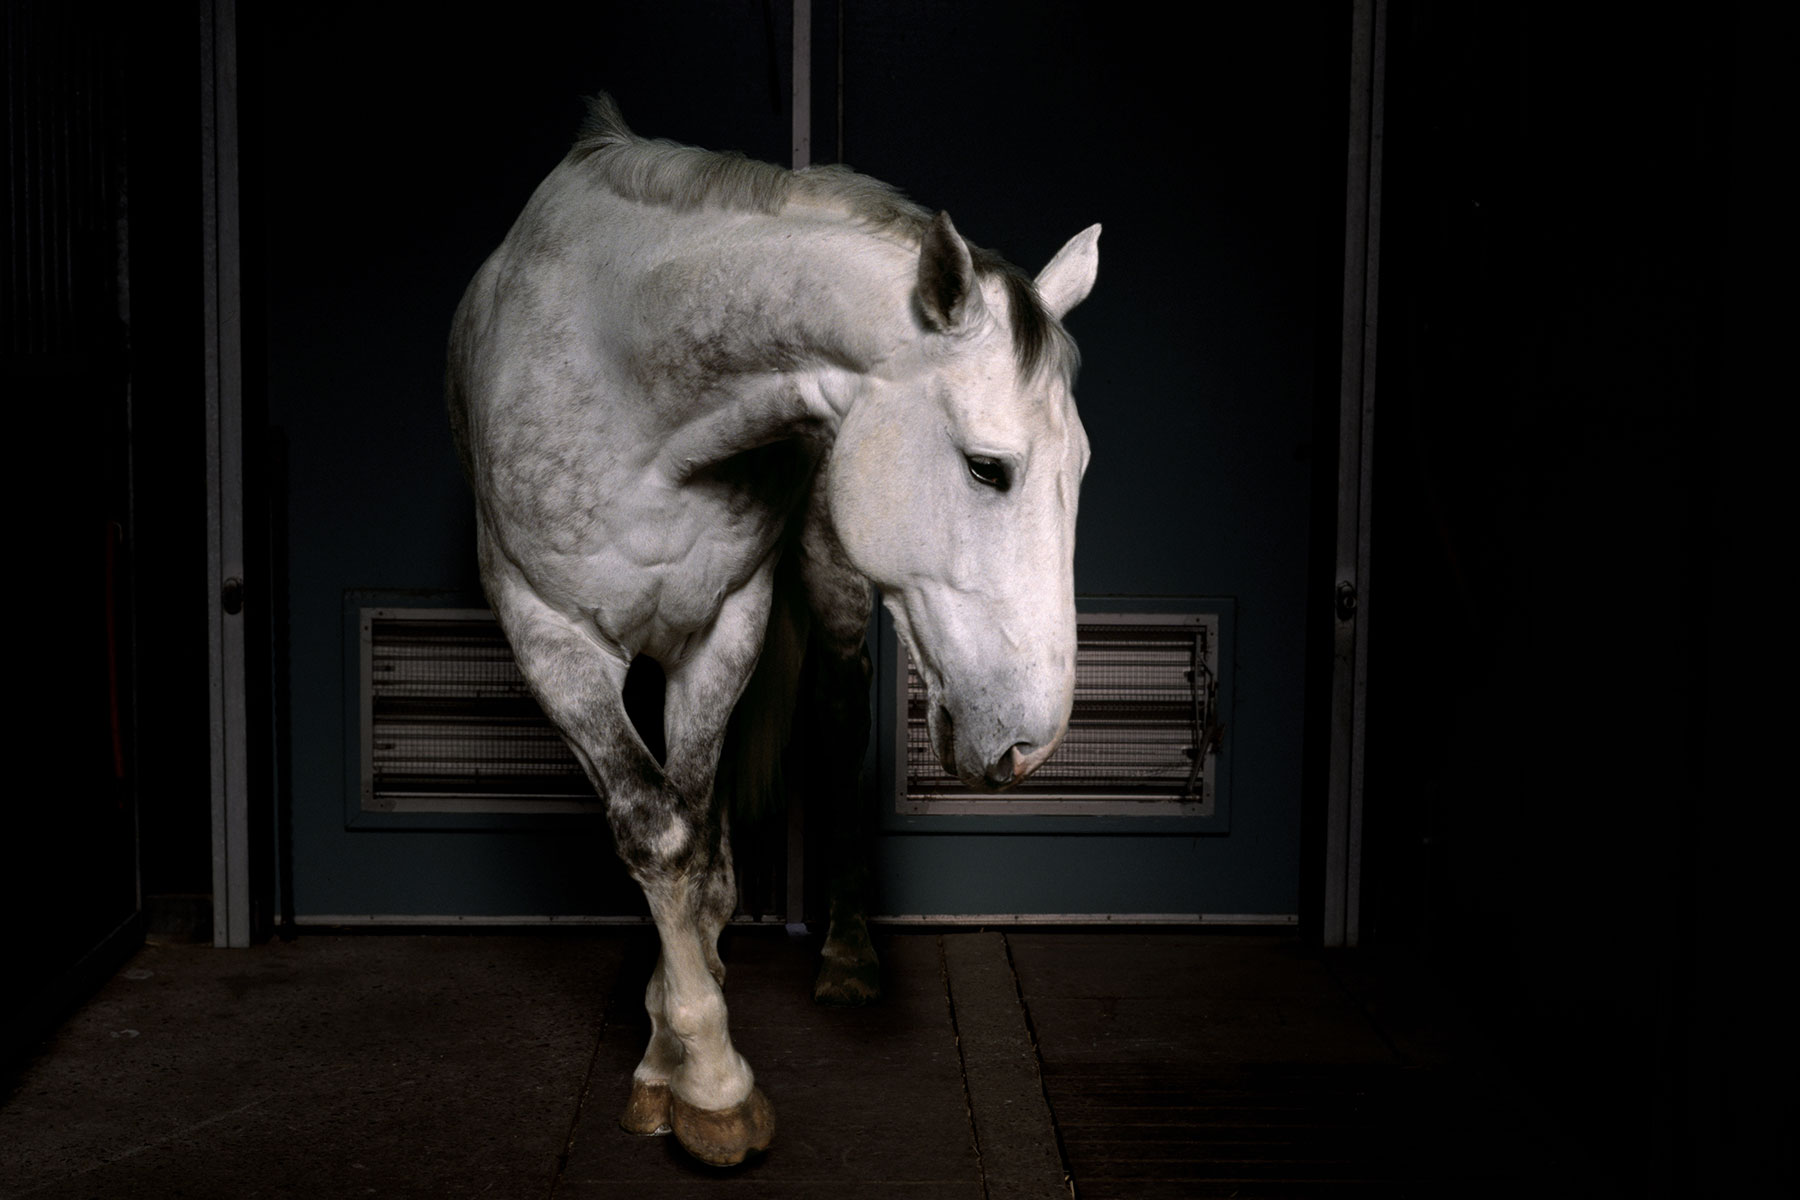 Horses can lapse into apparent depression when they lose a companion.